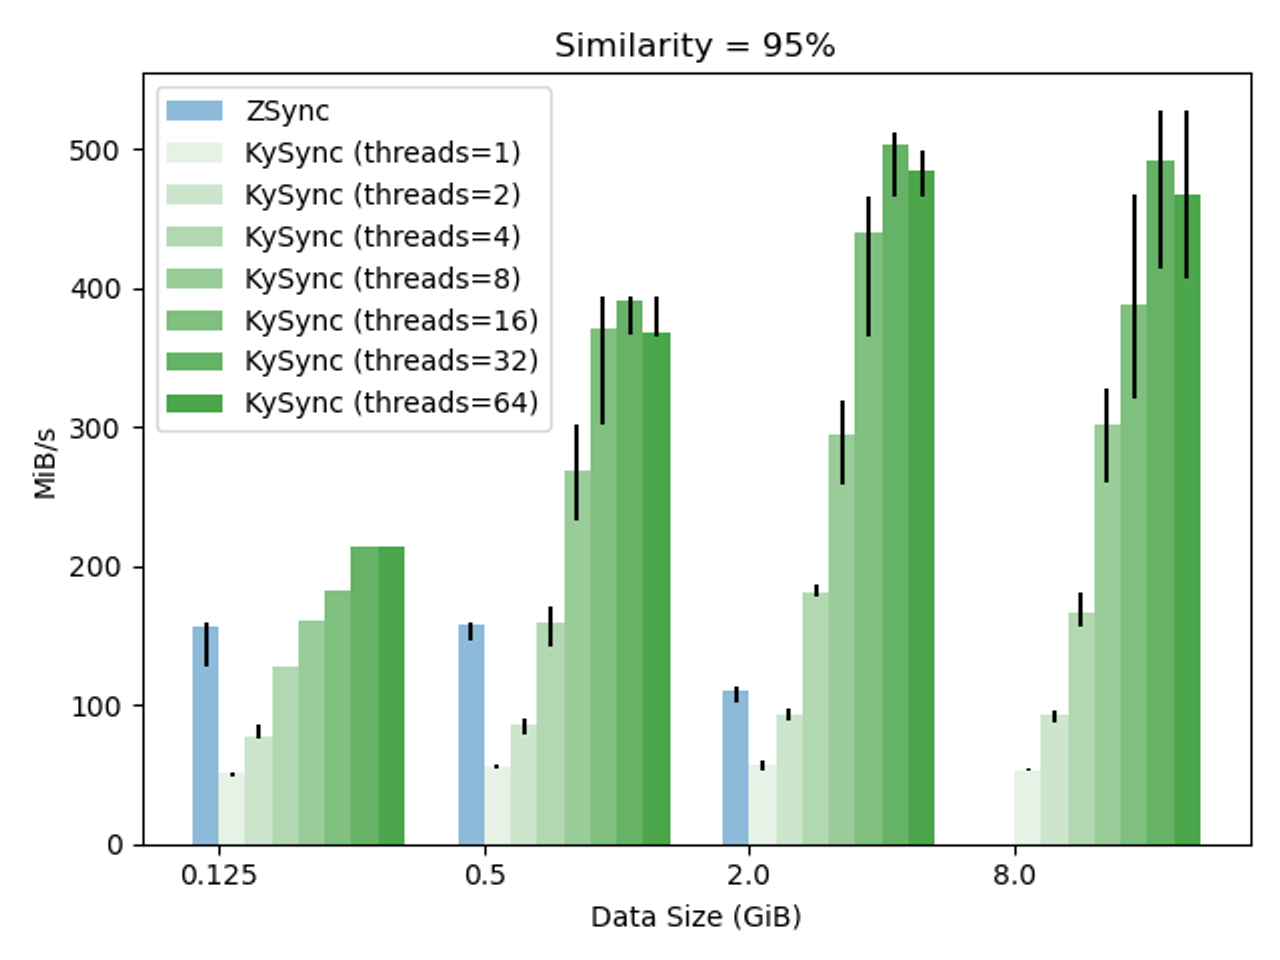 Transfer speeds (higher is better) for KySync vs Zsync, for a 5% update to a dataset, with varying file sizes and, for KySync, number of threads.  Zsync has an advantage for smaller data sizes (<2 GB), but KySync can throw more threads at the problem and have improved performance.